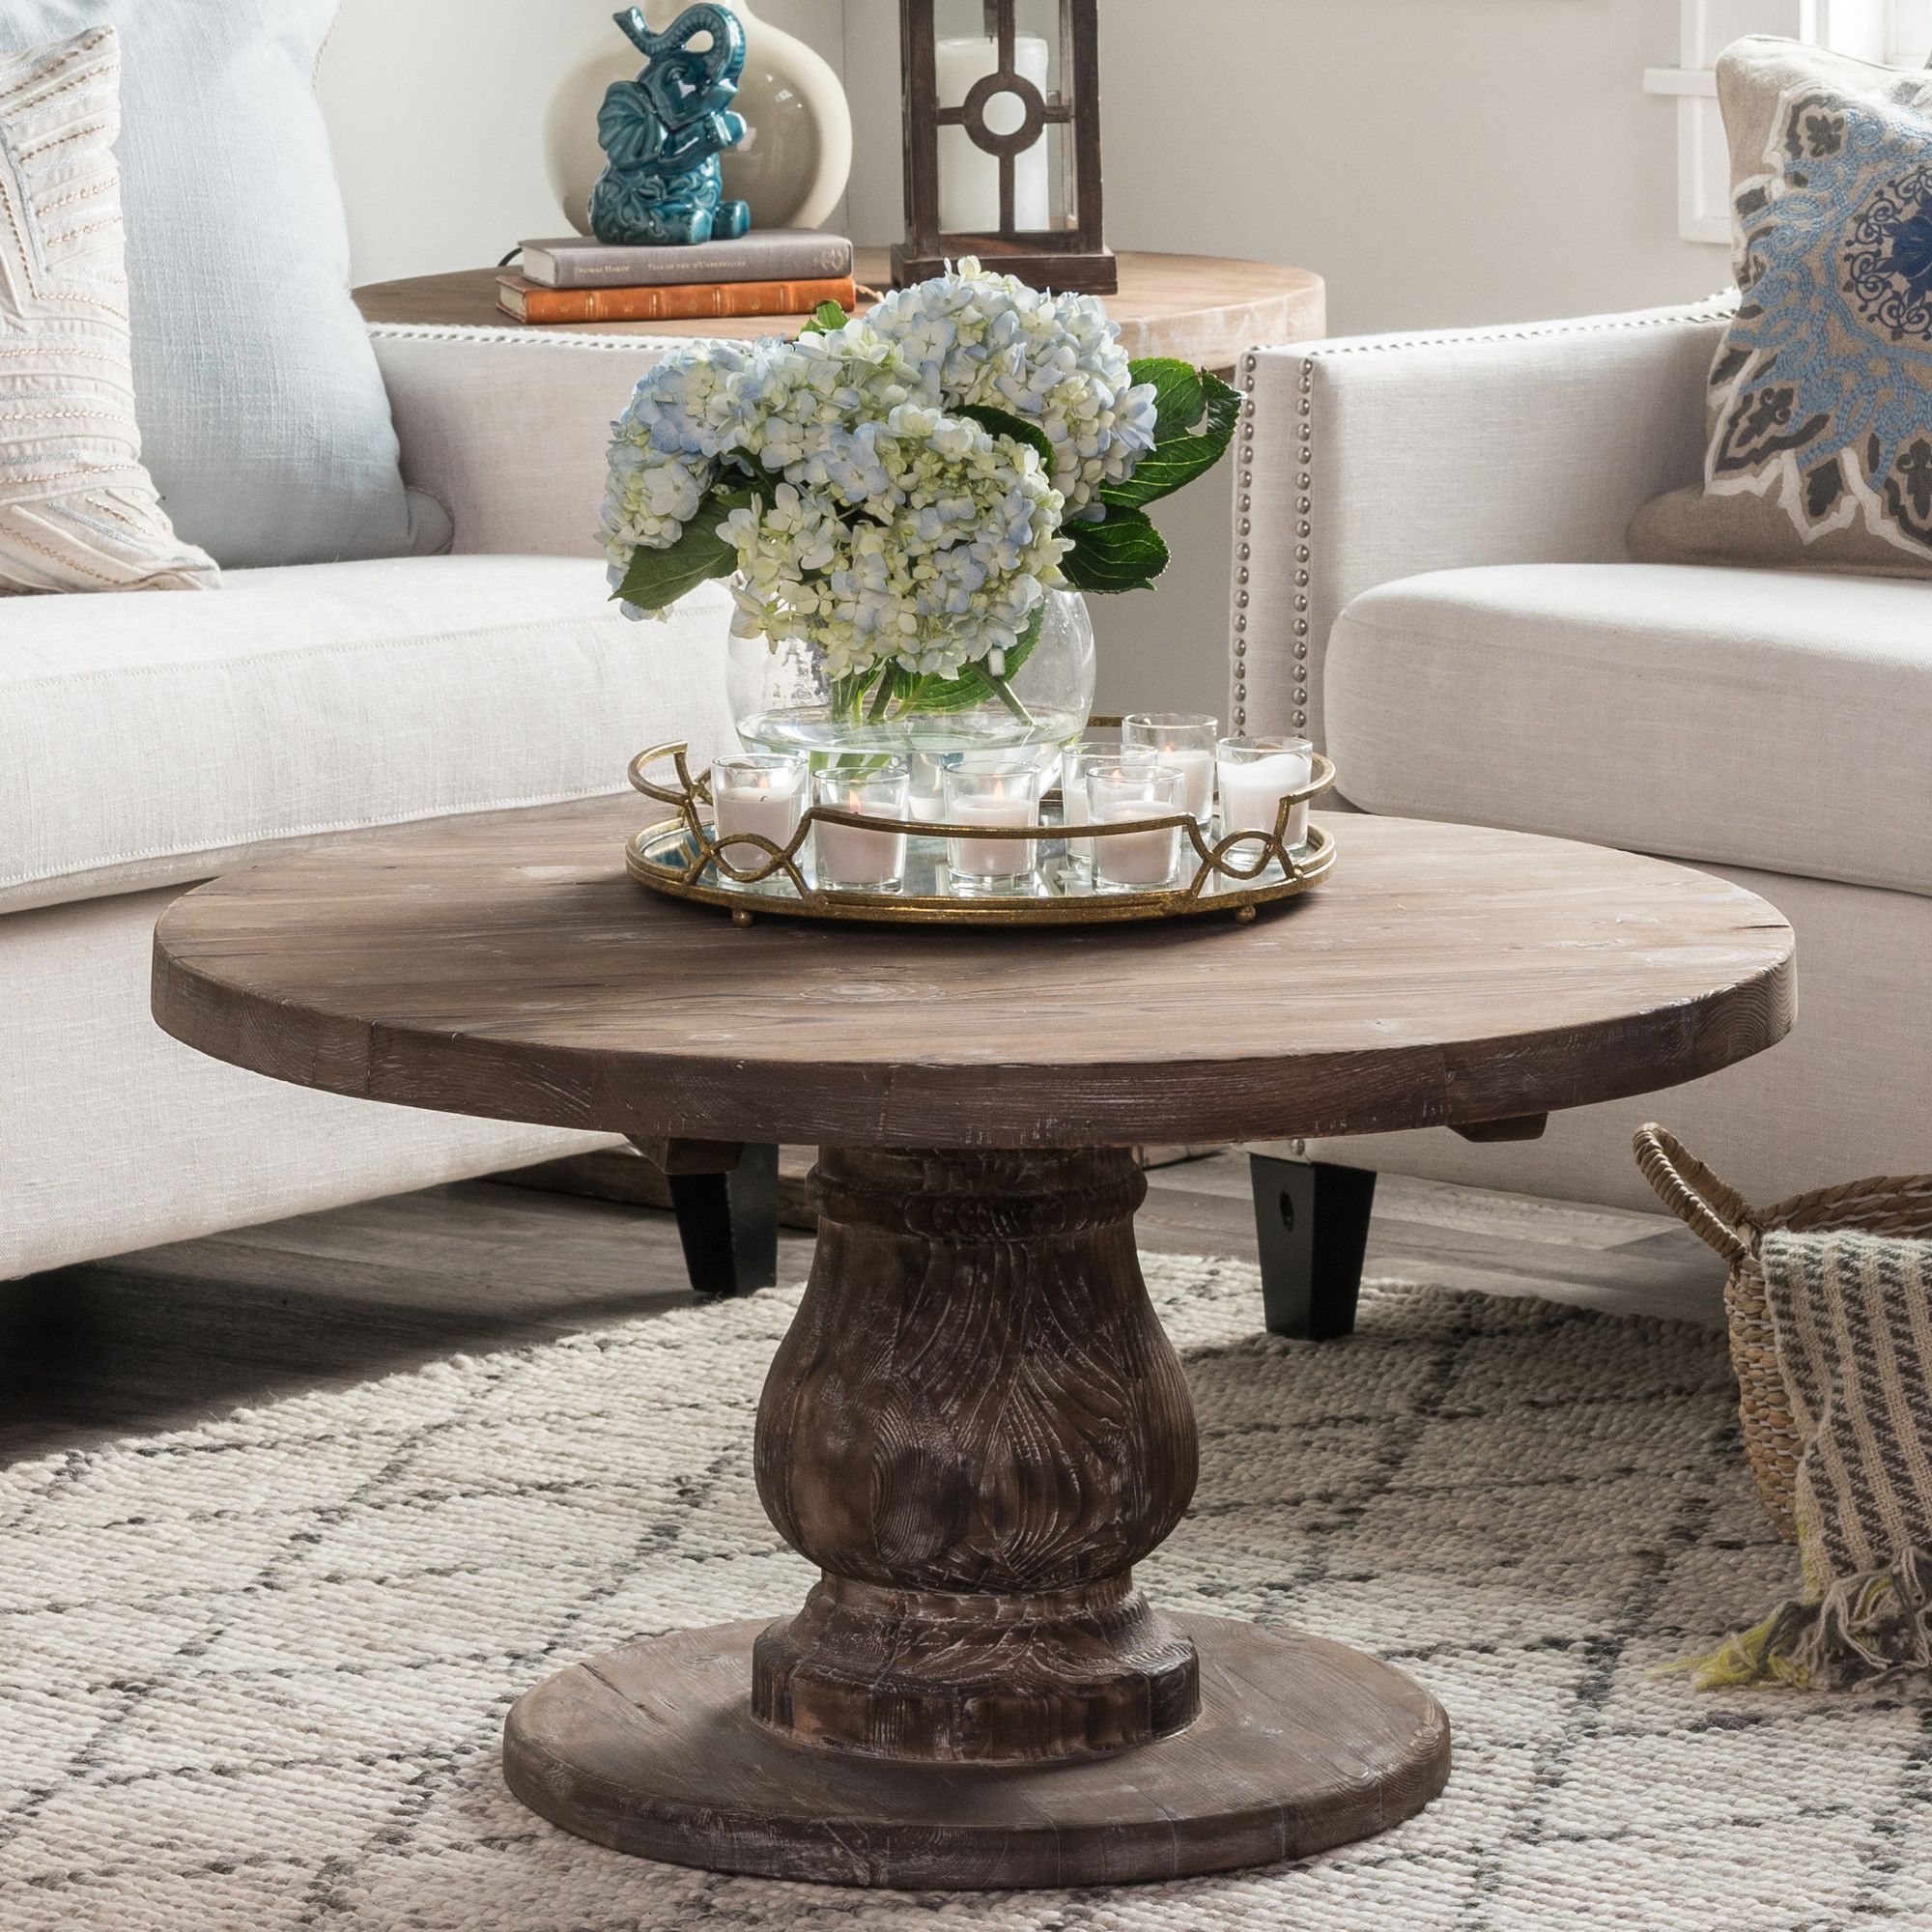 Bengie Coffee Table Pedestal Coffee Table, Round Glass Coffee Table Throughout American Heritage Round Coffee Tables (Gallery 20 of 20)